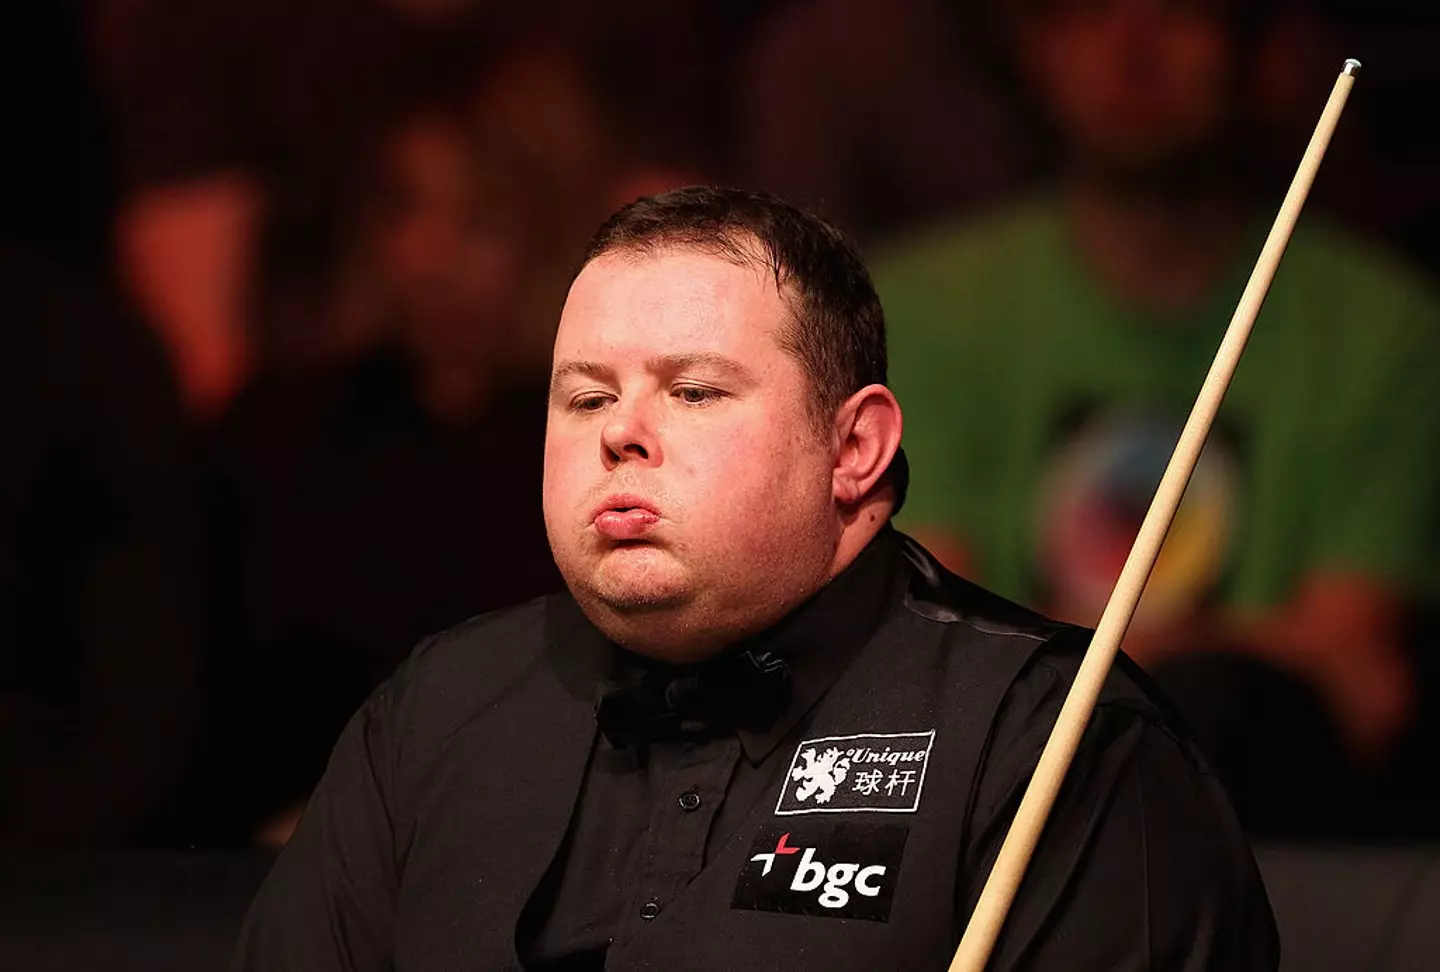 Stephen Lee pictured at the 2008 Masters (